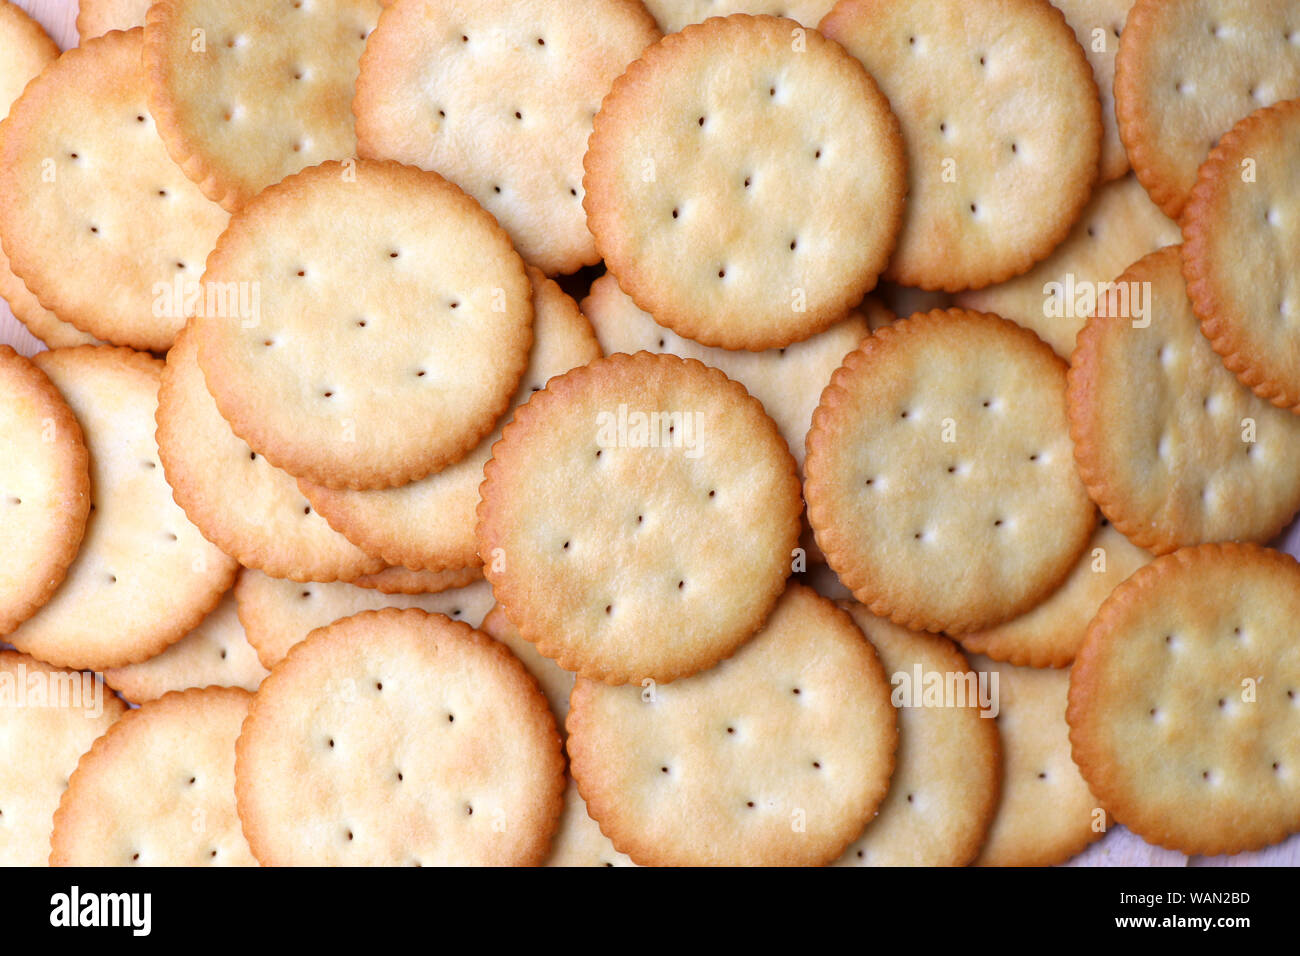 Biscuits cracker background. Crackers lay on the table. Stock Photo